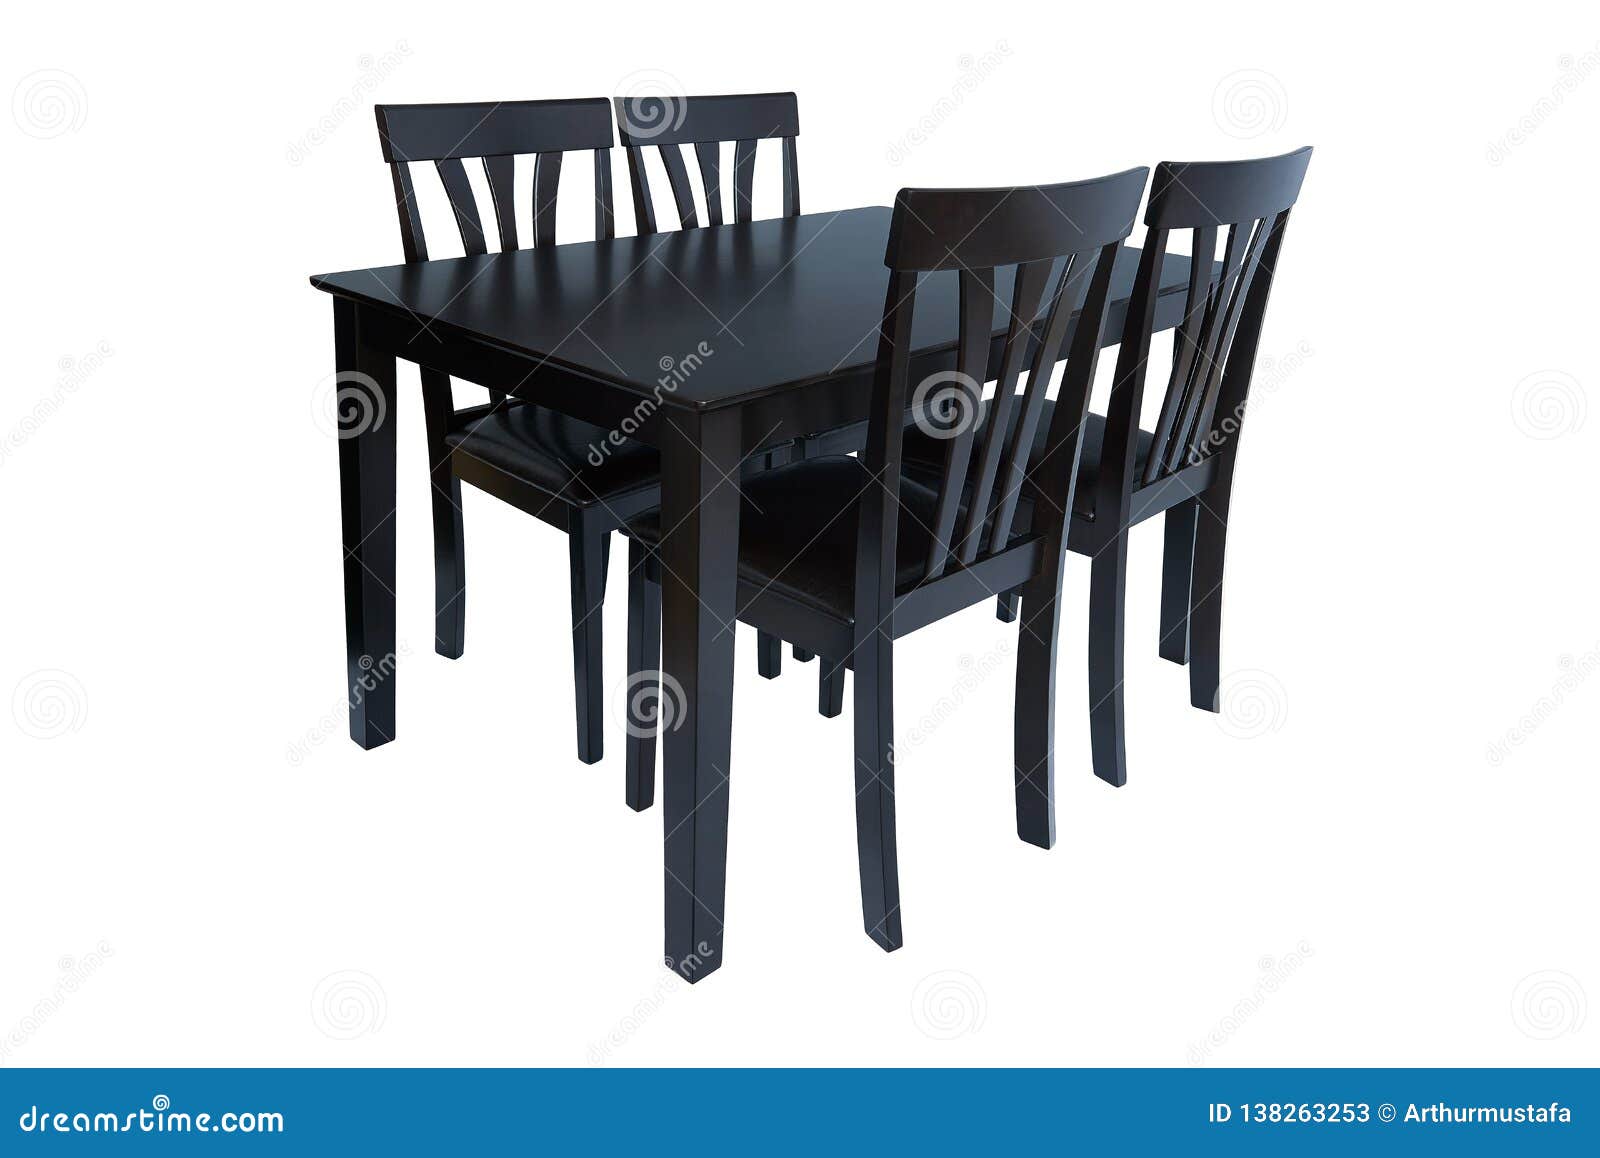 Dining Room Furniture Set Of Table And Four Chairs Elegant Dining Furniture For Living Room Or Kitchen Made Of Black Wood And Stock Image Image Of Background Domestic 138263253